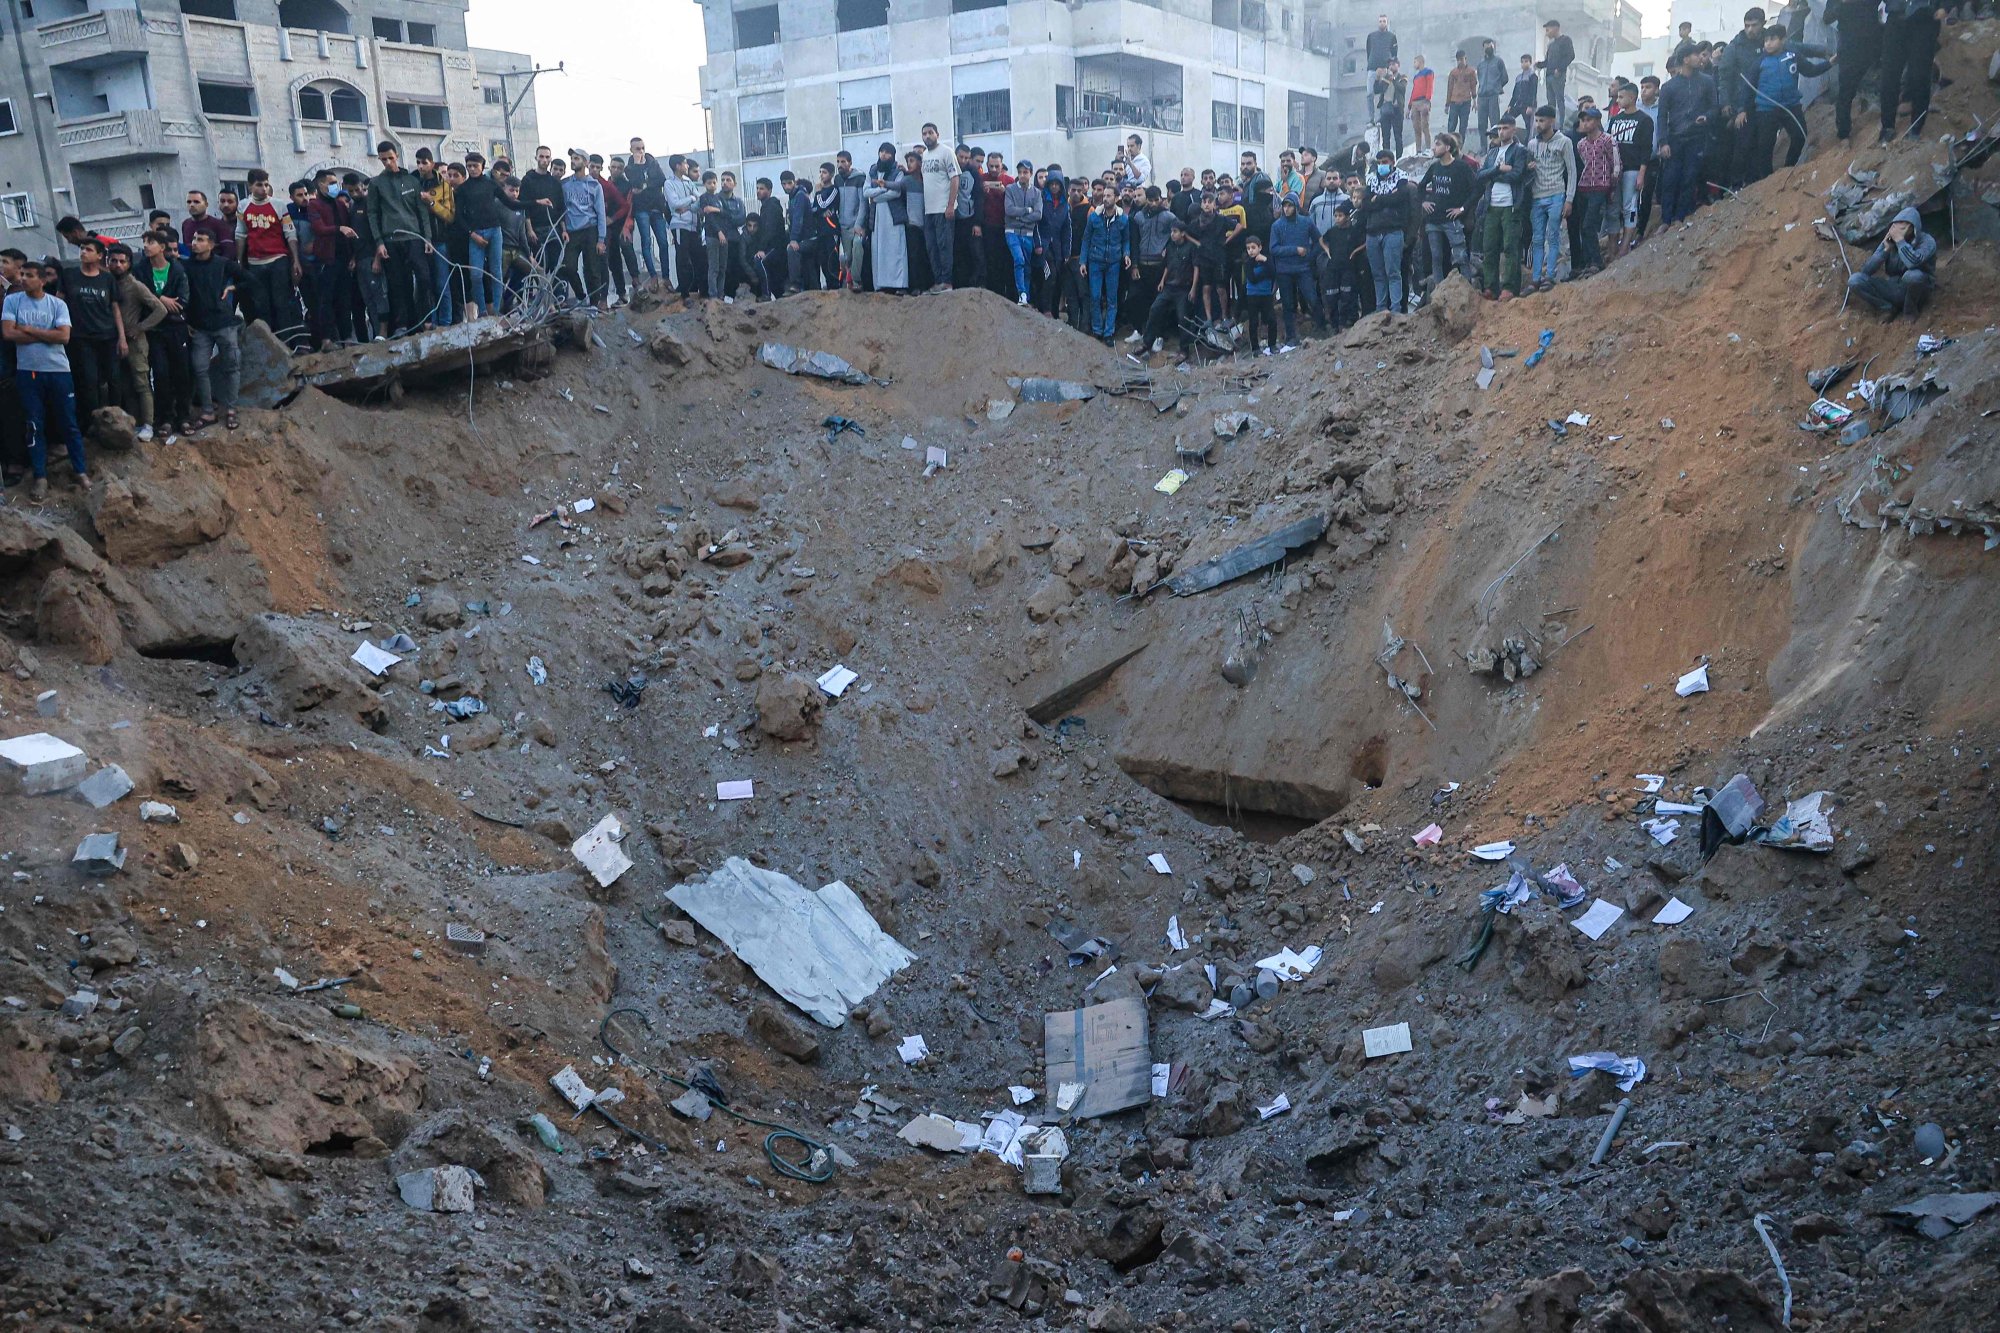 israel-gaza war: 2 months on, how many palestinians have died?